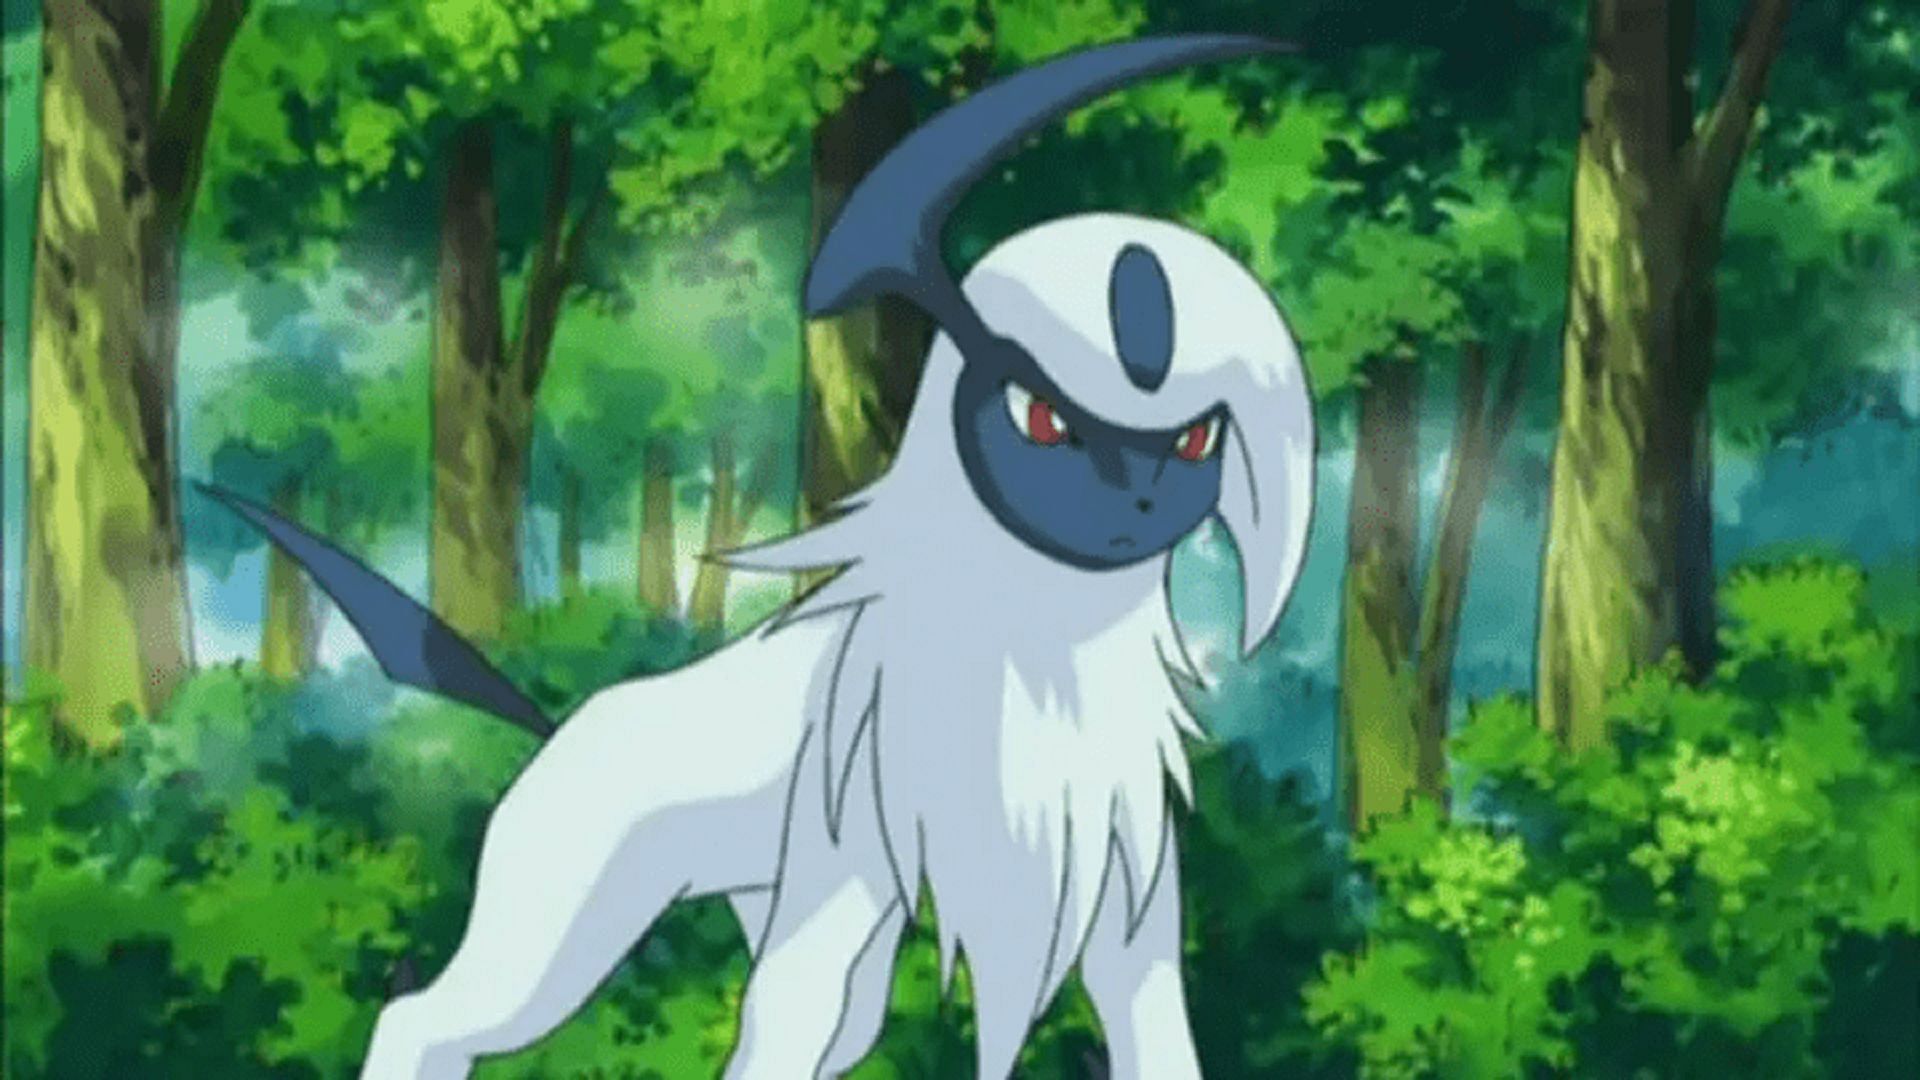 Absol is currently a 3-star raid boss in Pokemon GO (Image via The Pokemon Company)